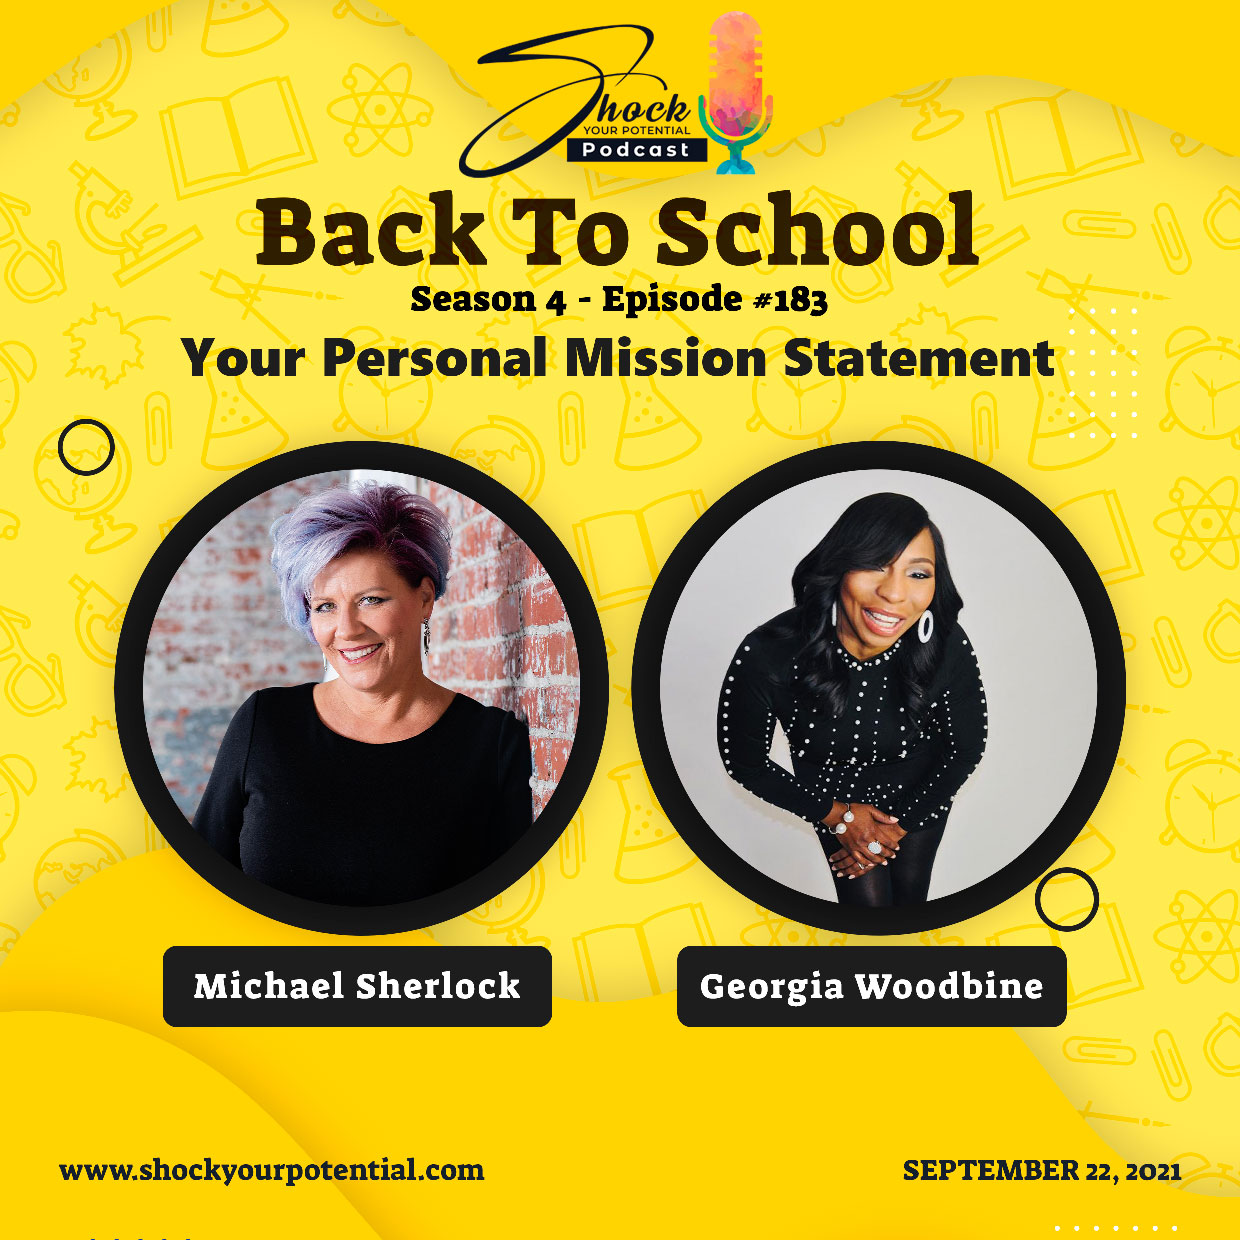 Your Personal Mission Statement – Georgia Woodbine